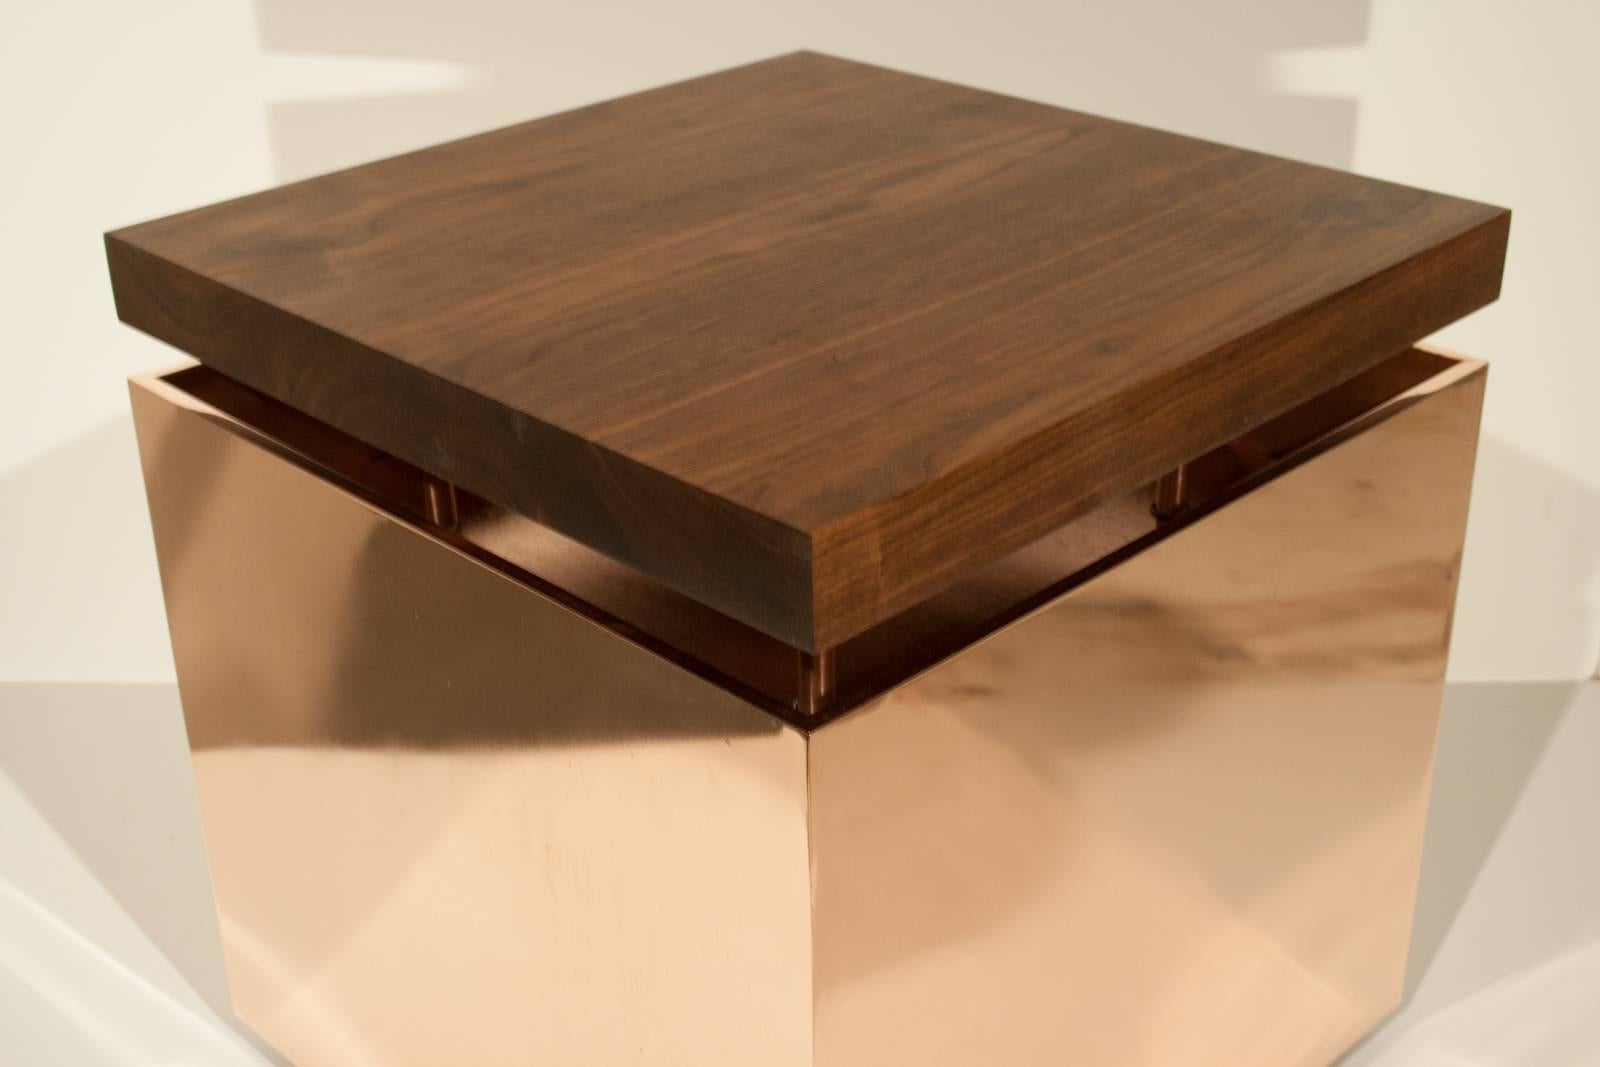 Pair of Contemporary Cube End Tables in Copper and Walnut by Brant Ritter In Excellent Condition For Sale In Los Angeles, CA